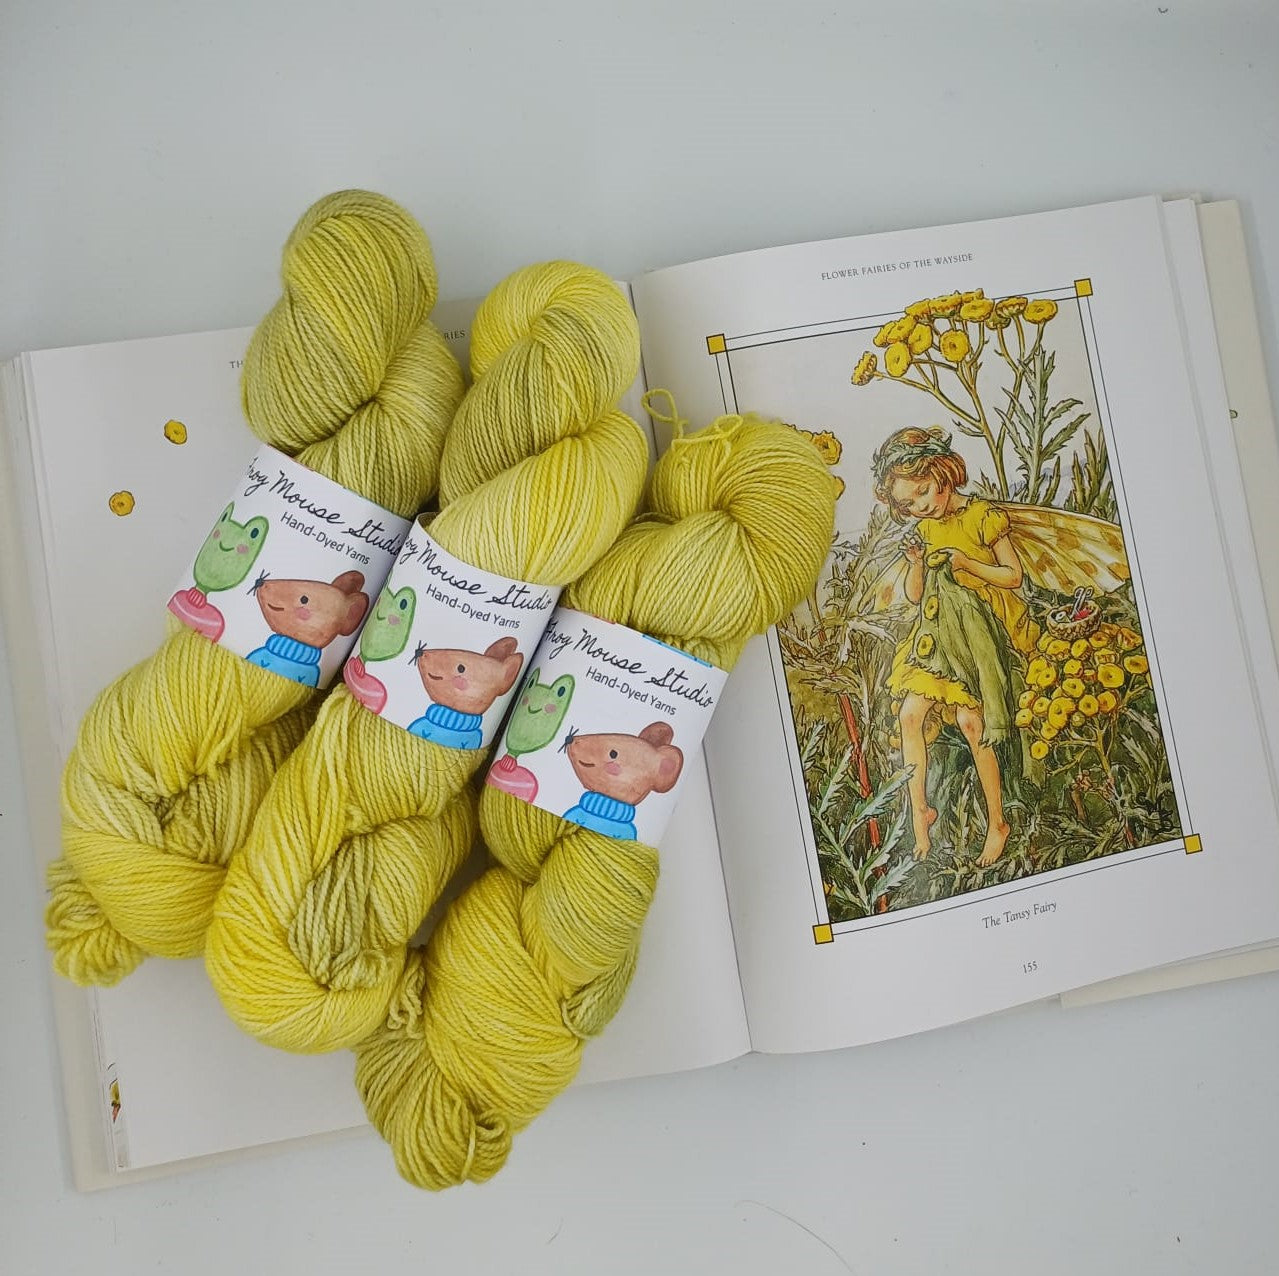 "The Tansy Fairy" on Frog Mouse Twisty Sock